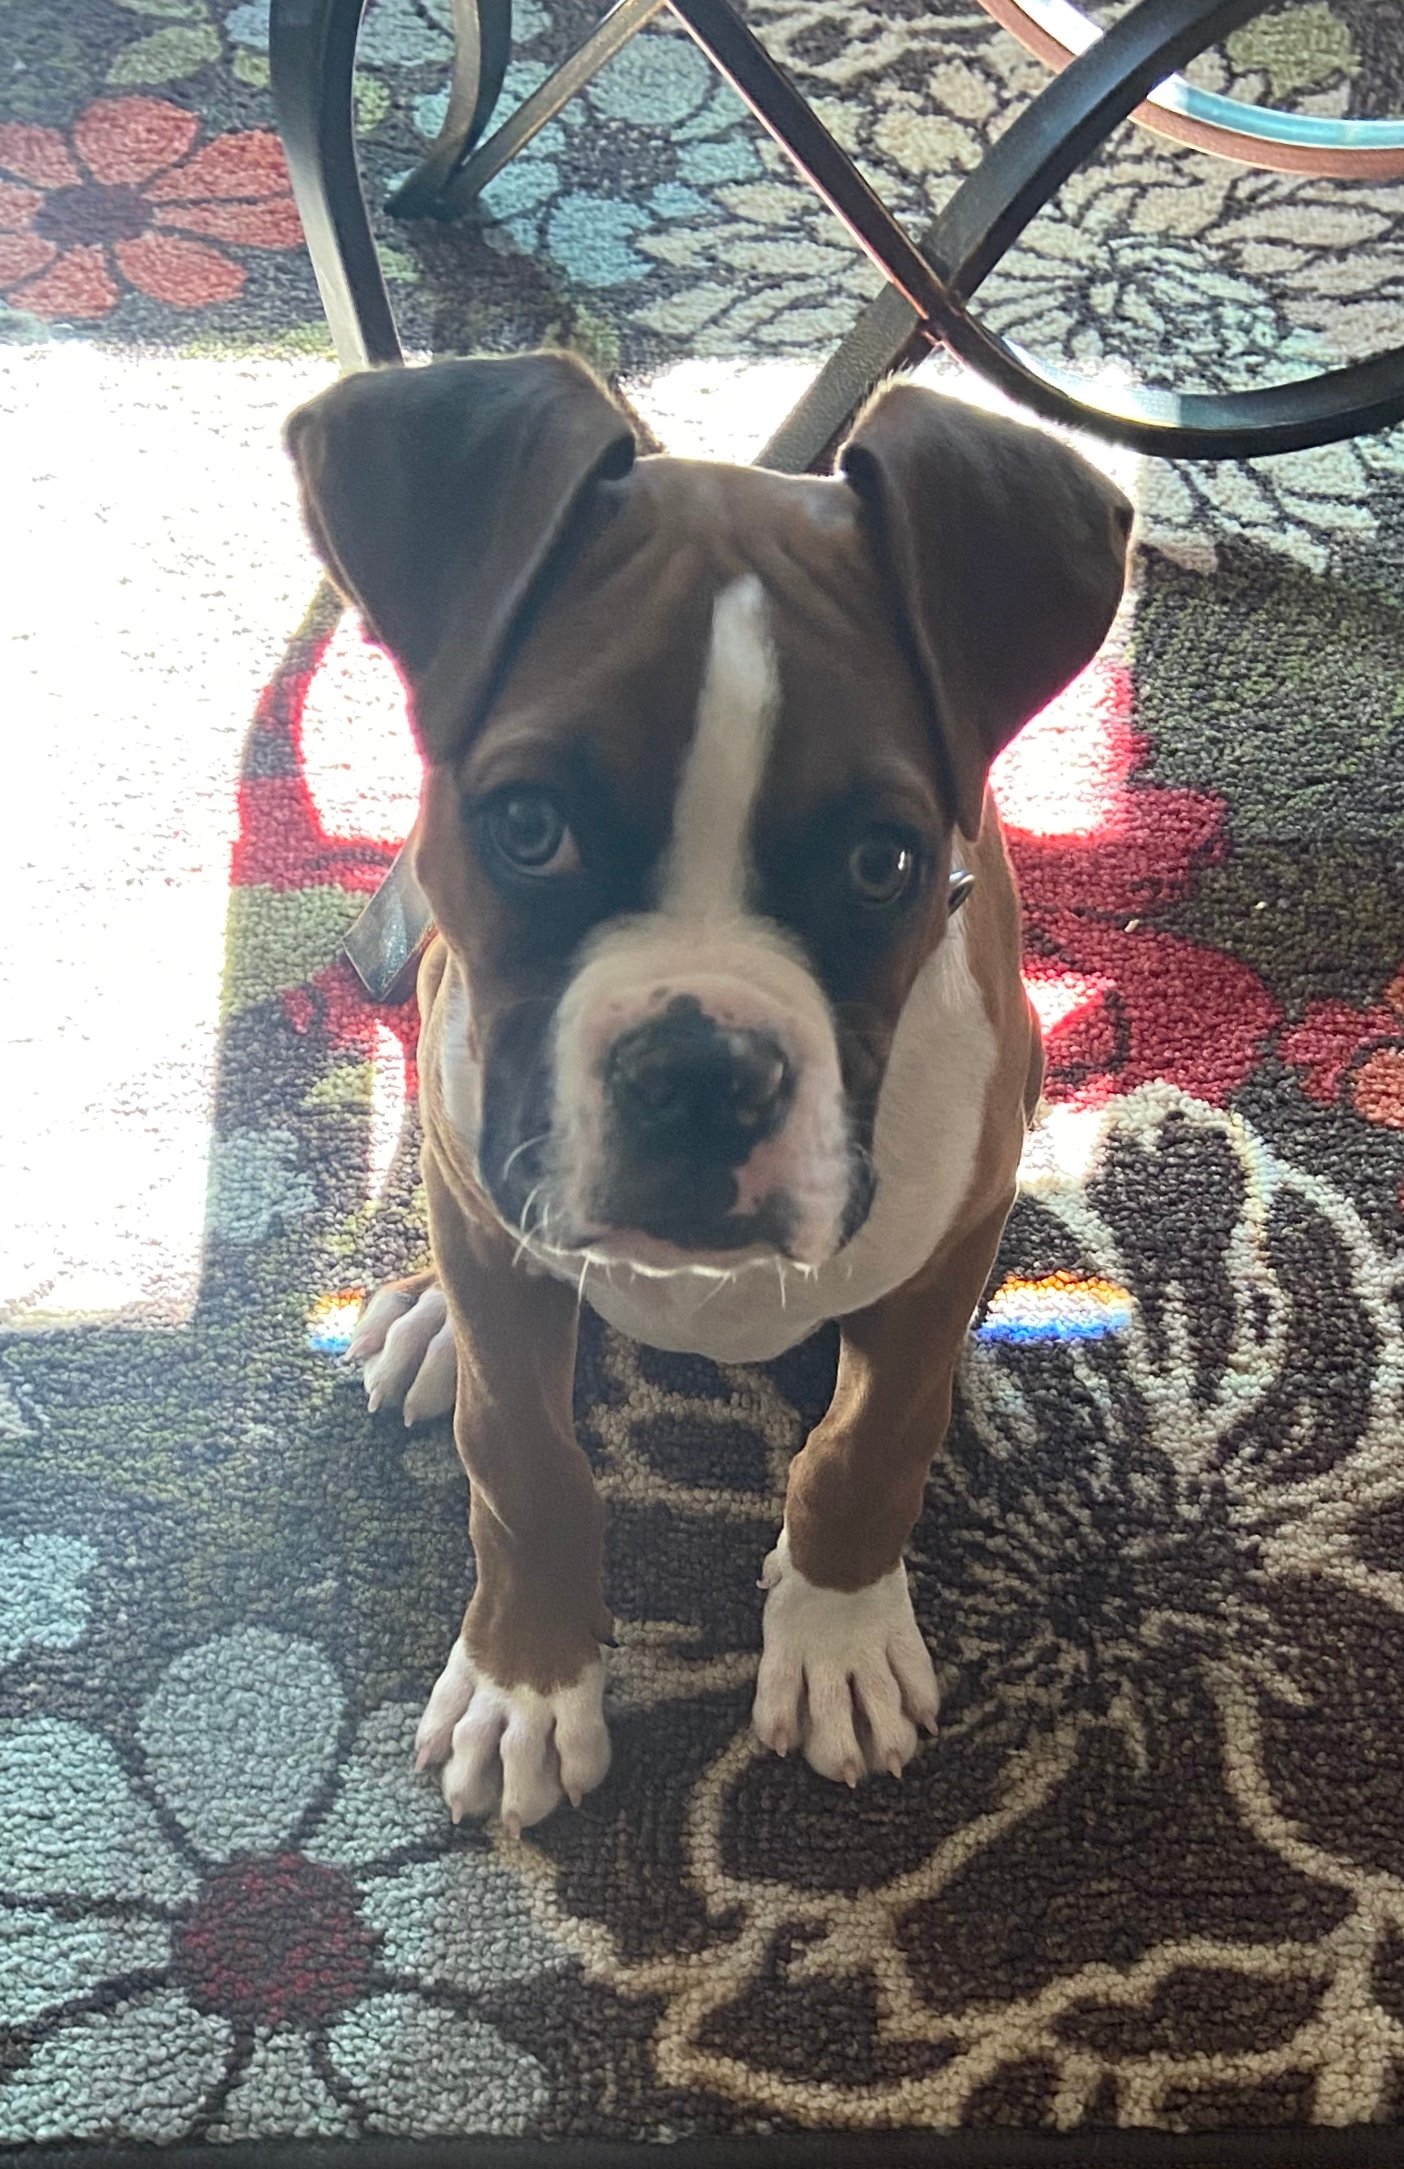 This boxer puppy is named Charley Burley in honor of the Hall-of-Famer and, despite being 12 weeks old, he weighs in at a solid 19 pounds. His human, boxing broadcaster James "Smitty" Smith, shares Charley's energy and zest for life. Photo credit: James "Smitty" Smith